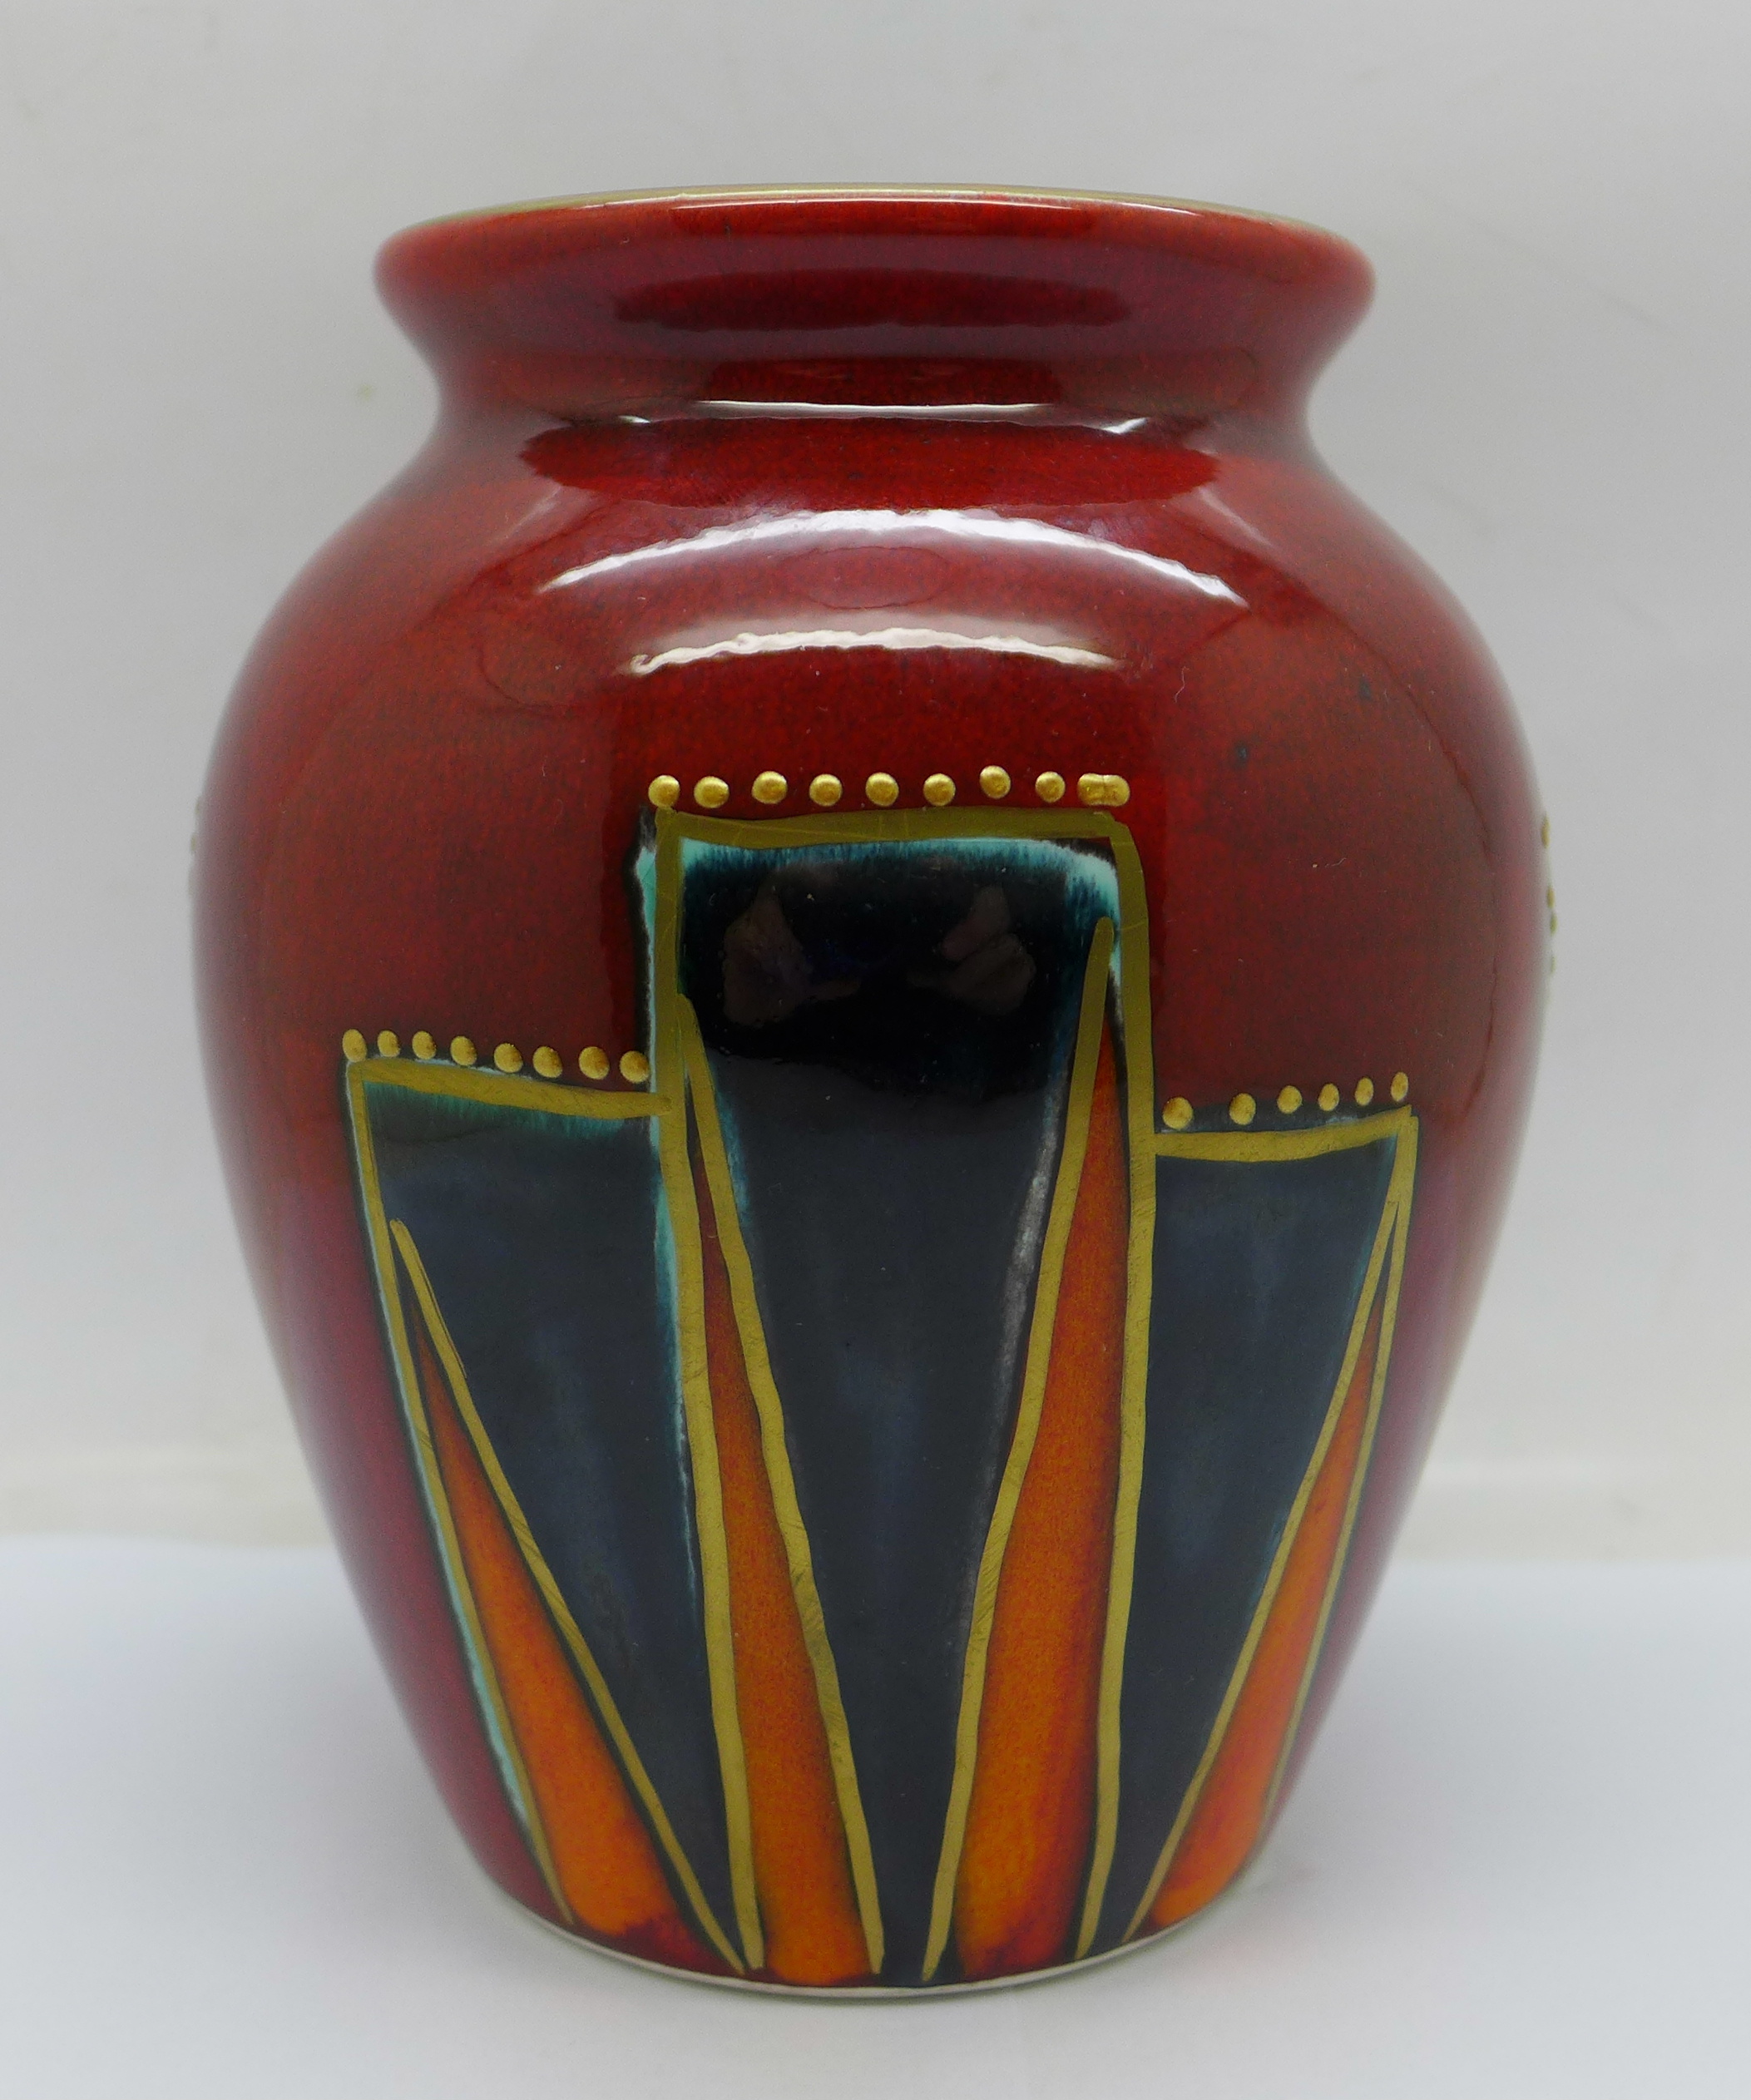 An Anita Harris art pottery vase, hand painted Ali Baba shape in the Deco design, signed by Anita - Image 2 of 8